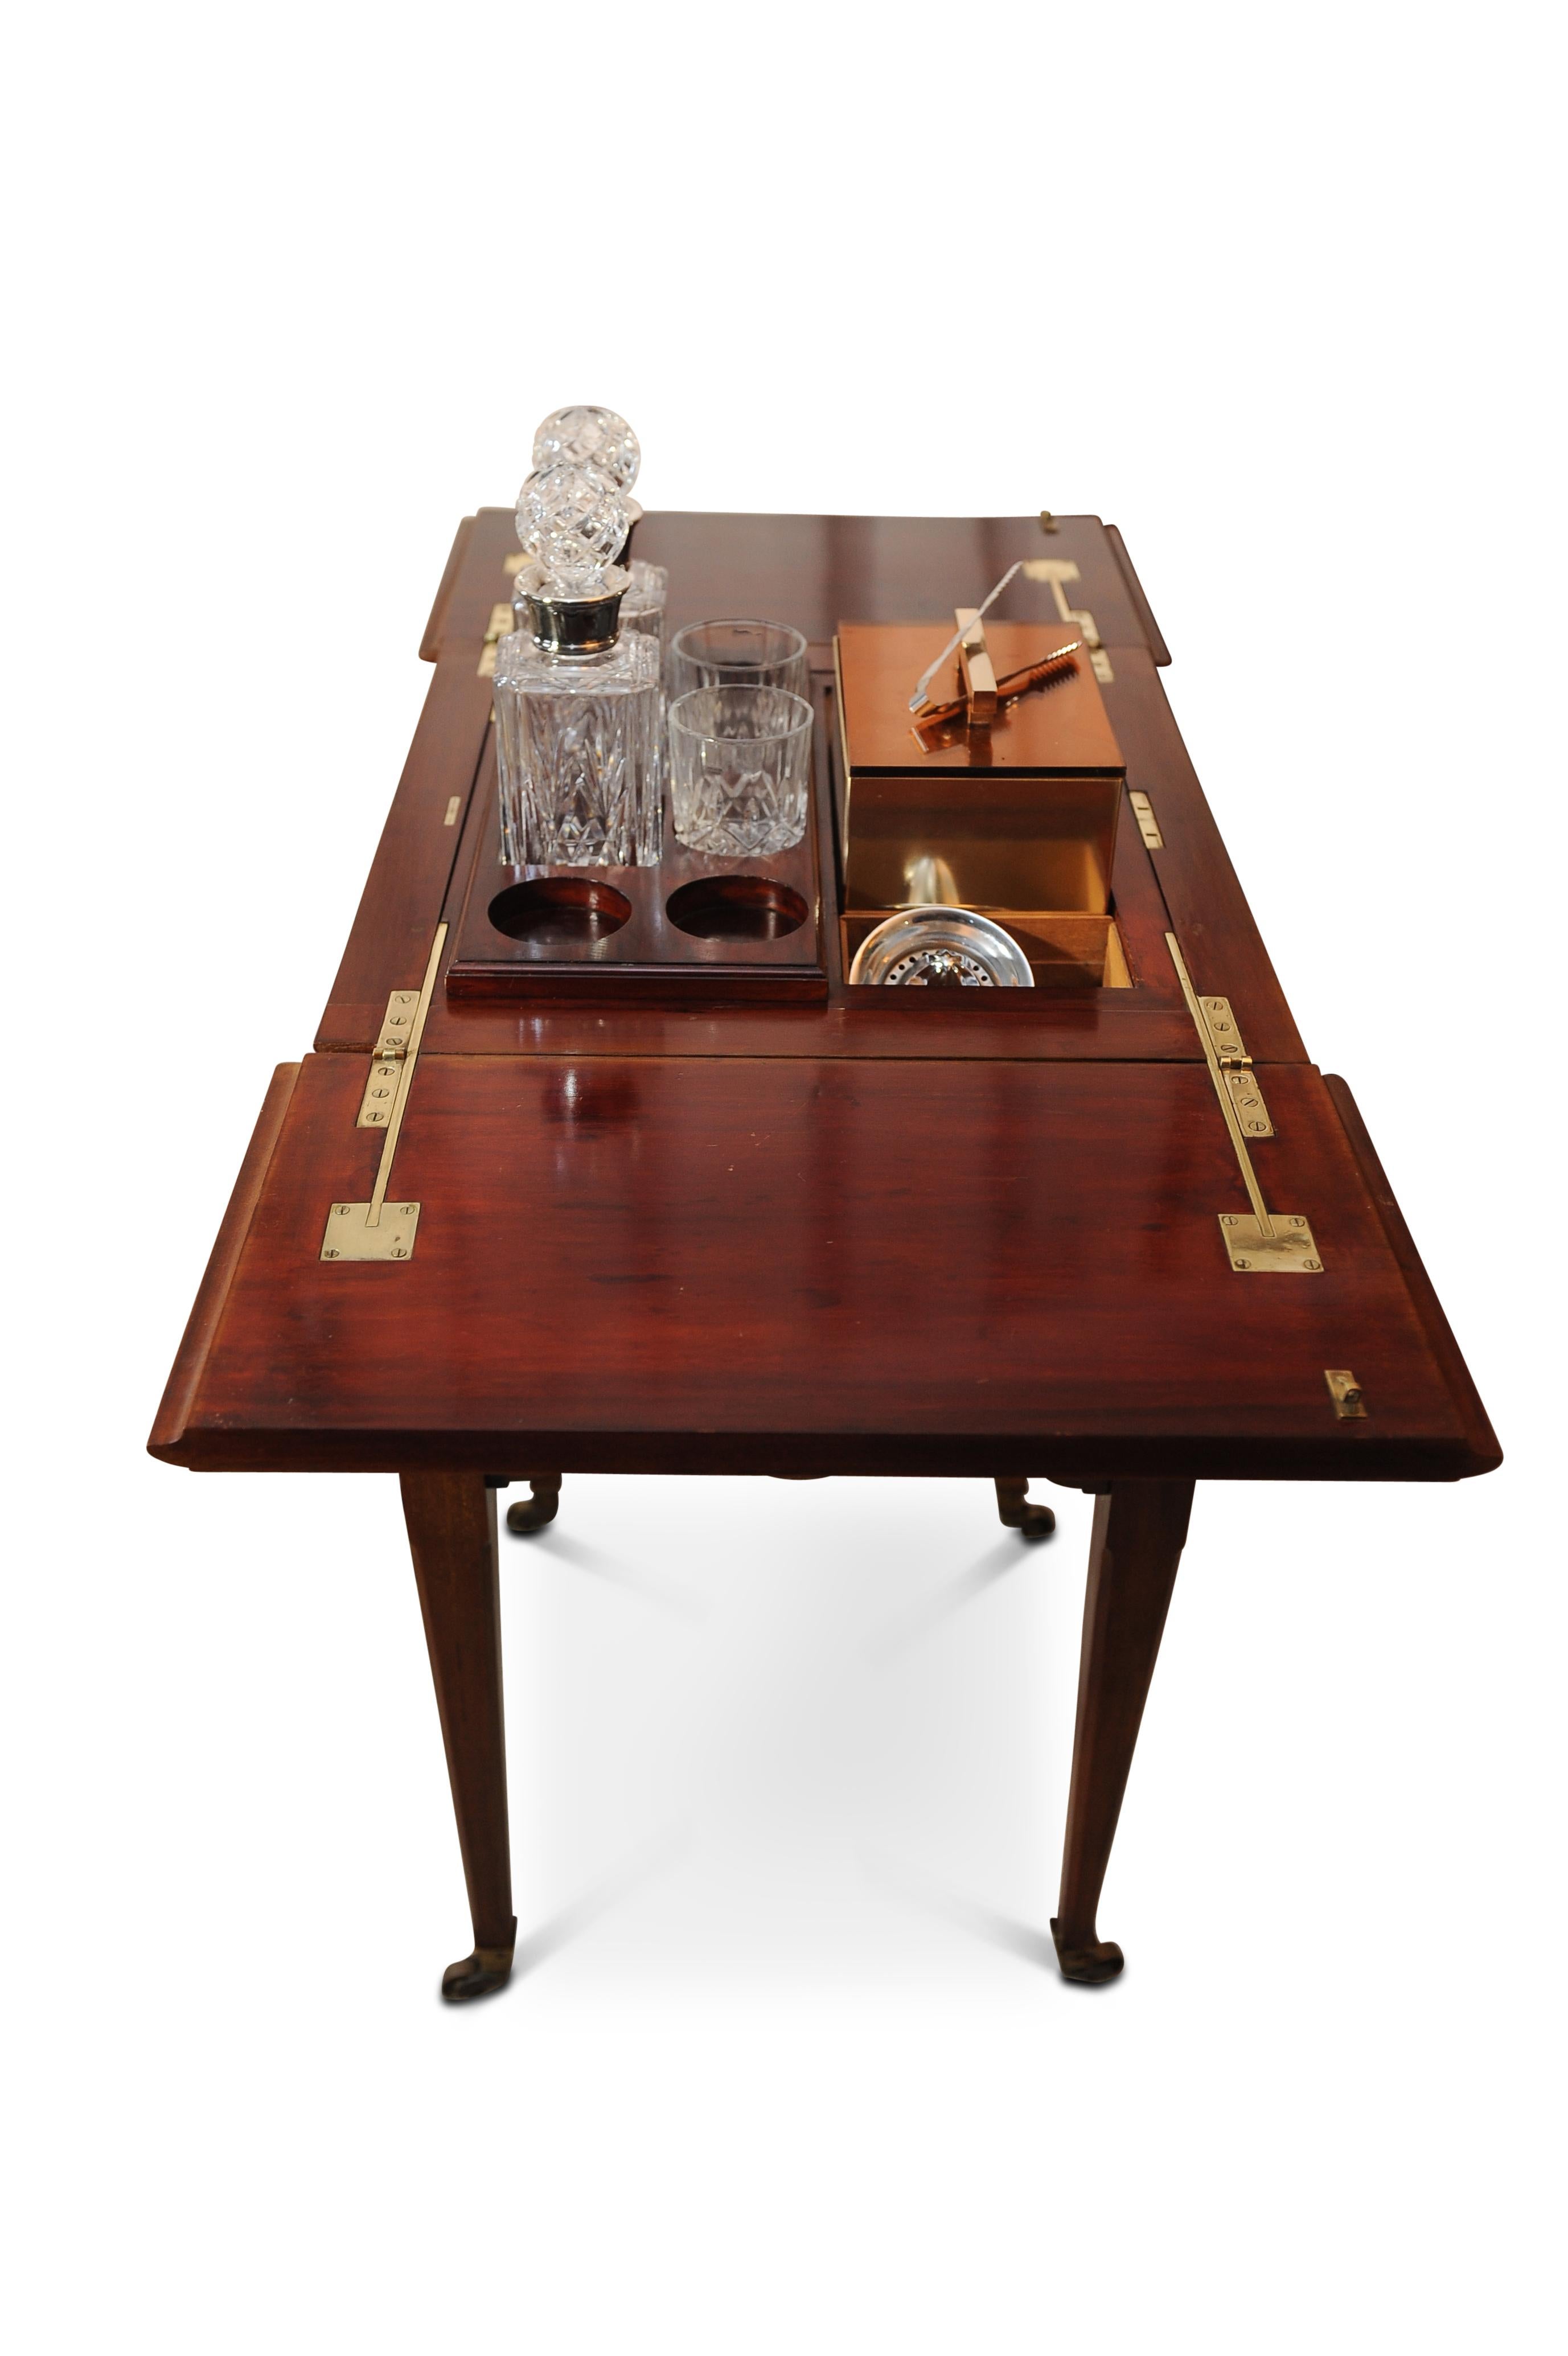 Hand-Crafted Luxurious London Made 1920s Pop Up Dry Bar Drinks Cabinet and Decanters For Sale